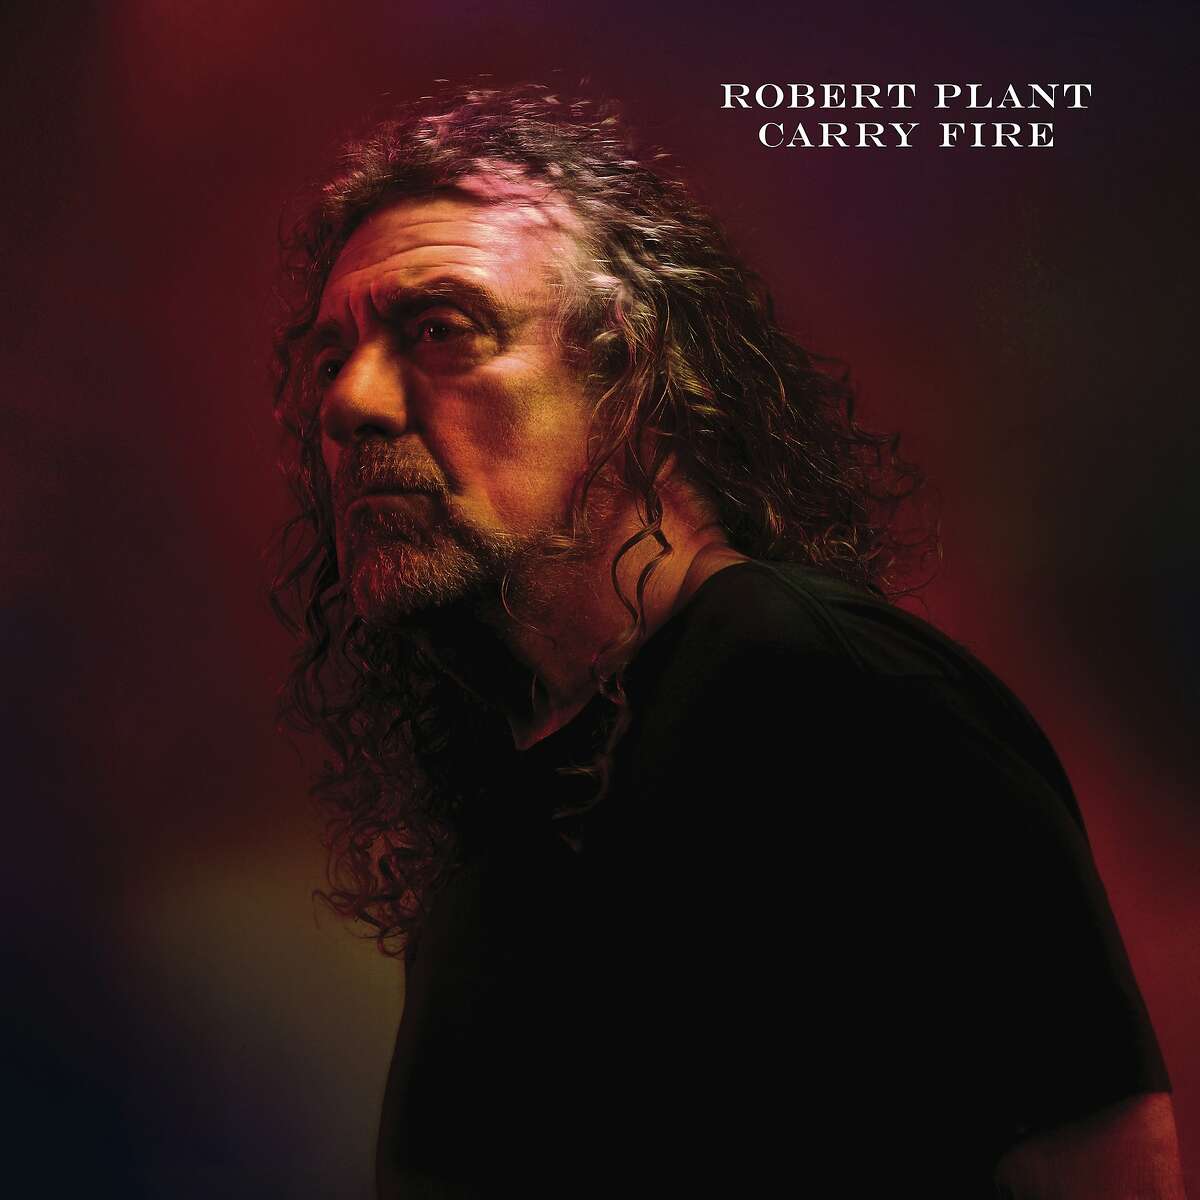 Robert Plant's 11th solo album is 'Carry Fire'